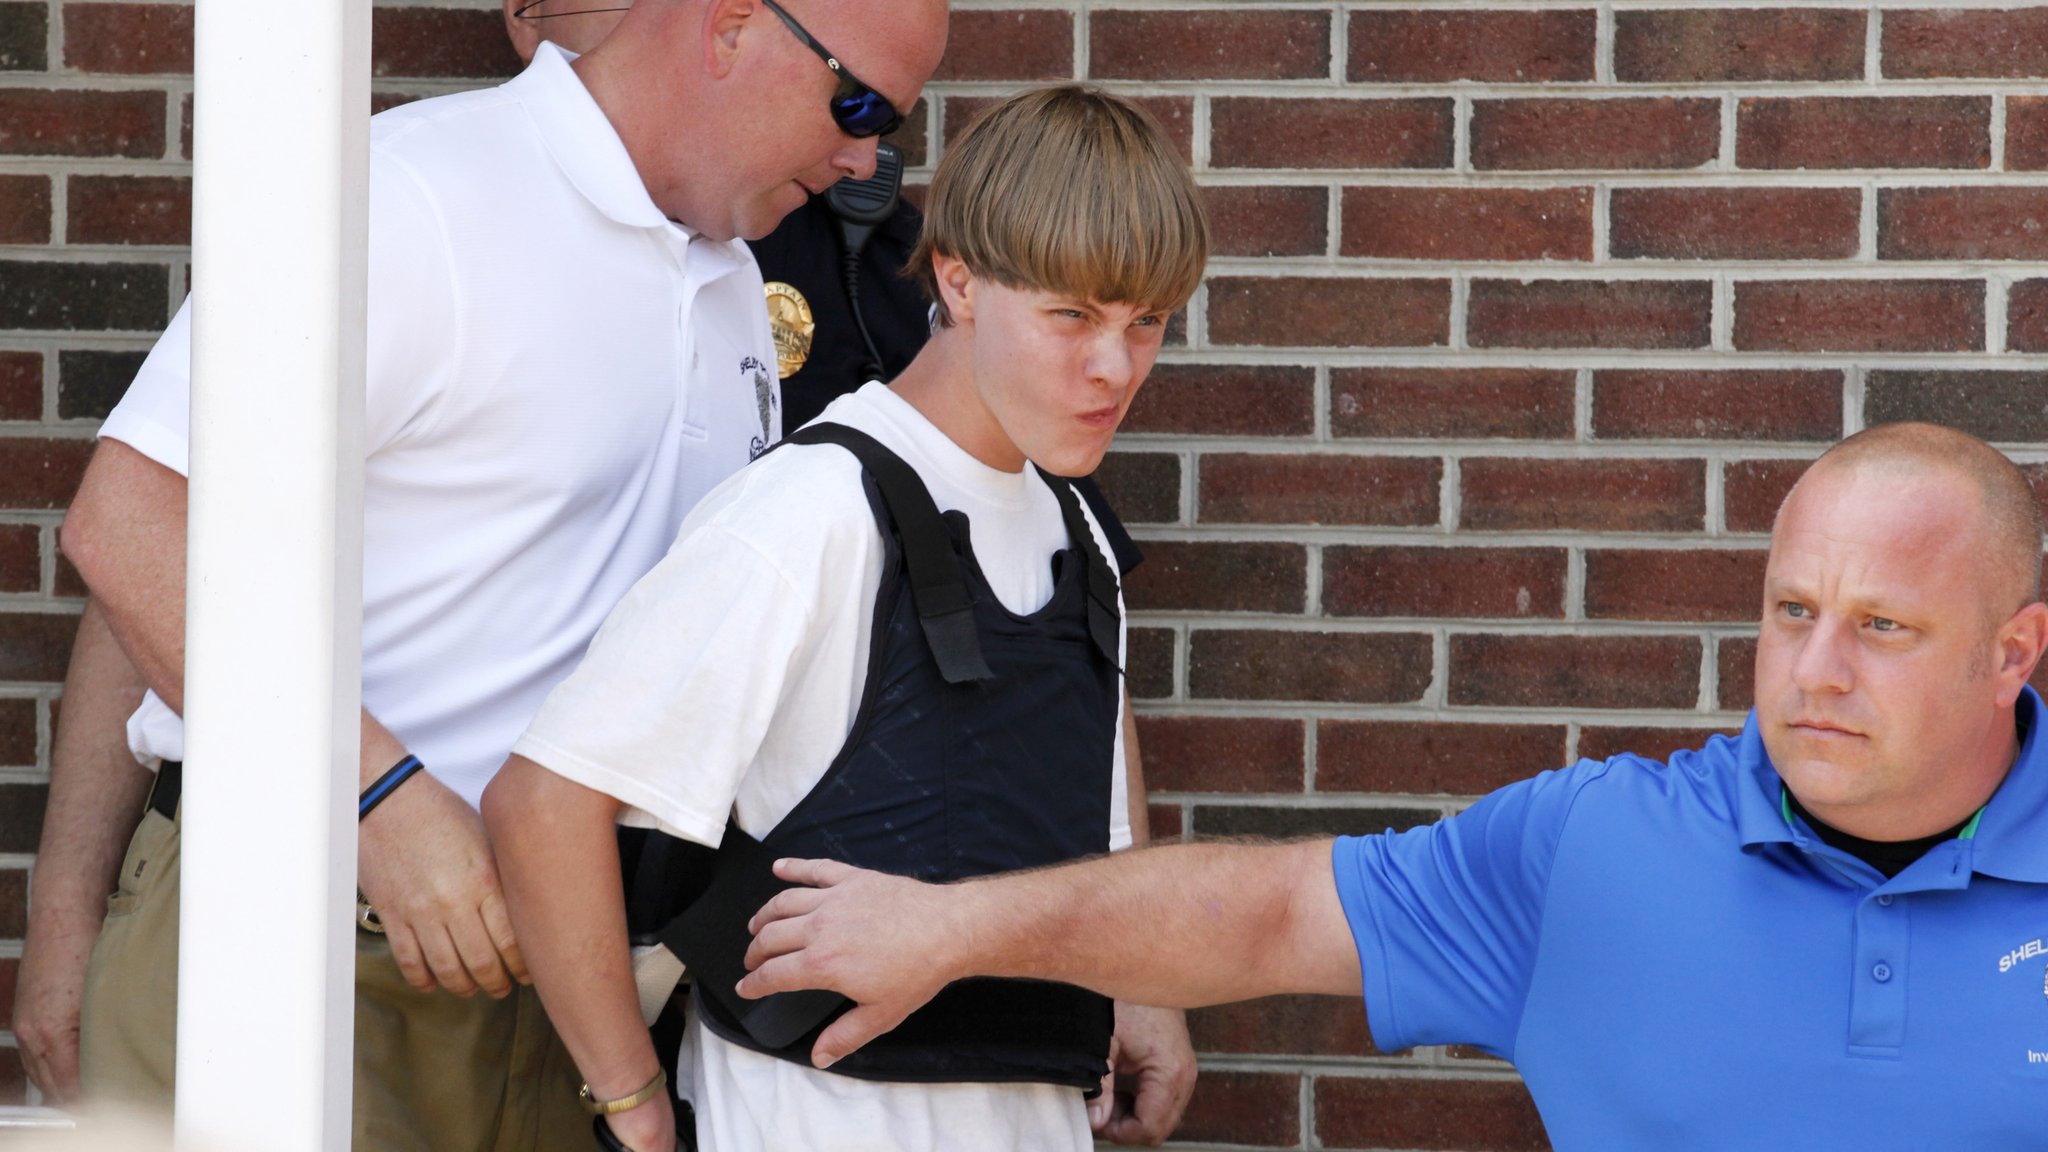 Dylann Roof, then 21, was arrested June 18, 2015. Roof is suspected of killing nine people during a prayer service at an historic African-American church in Charleston, South Carolina (Photo: Reuters)